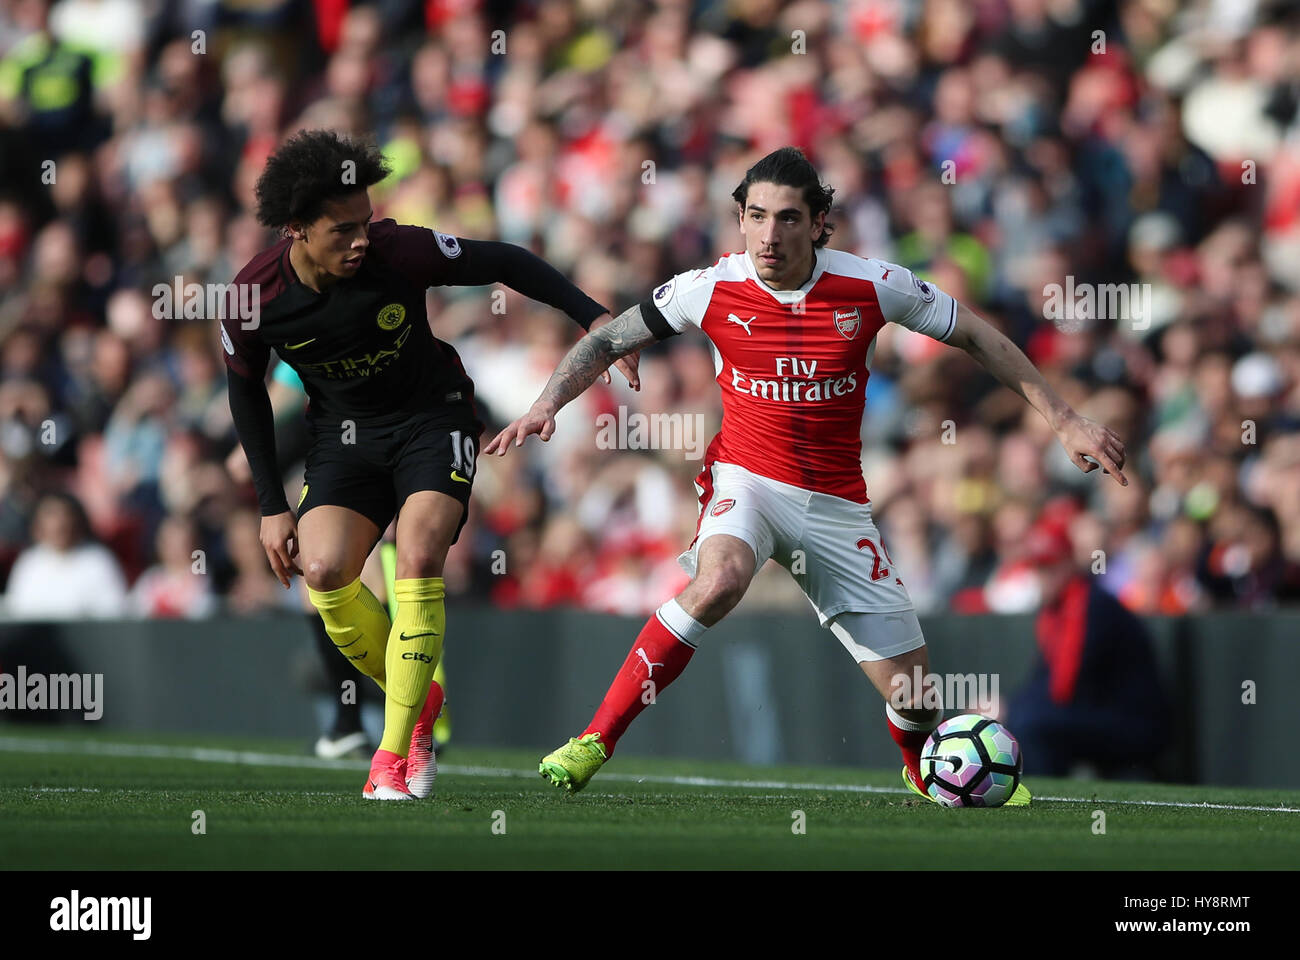 Arsenal's Hector Bellerin (right) and Manchester City's Leroy Sane battle for the ball during the Premier League match at the Emirates Stadium, London. PRESS ASSOCIATION Photo. Picture date: Sunday April 2, 2017. See PA story SOCCER Arsenal. Photo credit should read: Nick Potts/PA Wire. RESTRICTIONS: No use with unauthorised audio, video, data, fixture lists, club/league logos or 'live' services. Online in-match use limited to 75 images, no video emulation. No use in betting, games or single club/league/player publications. Stock Photo